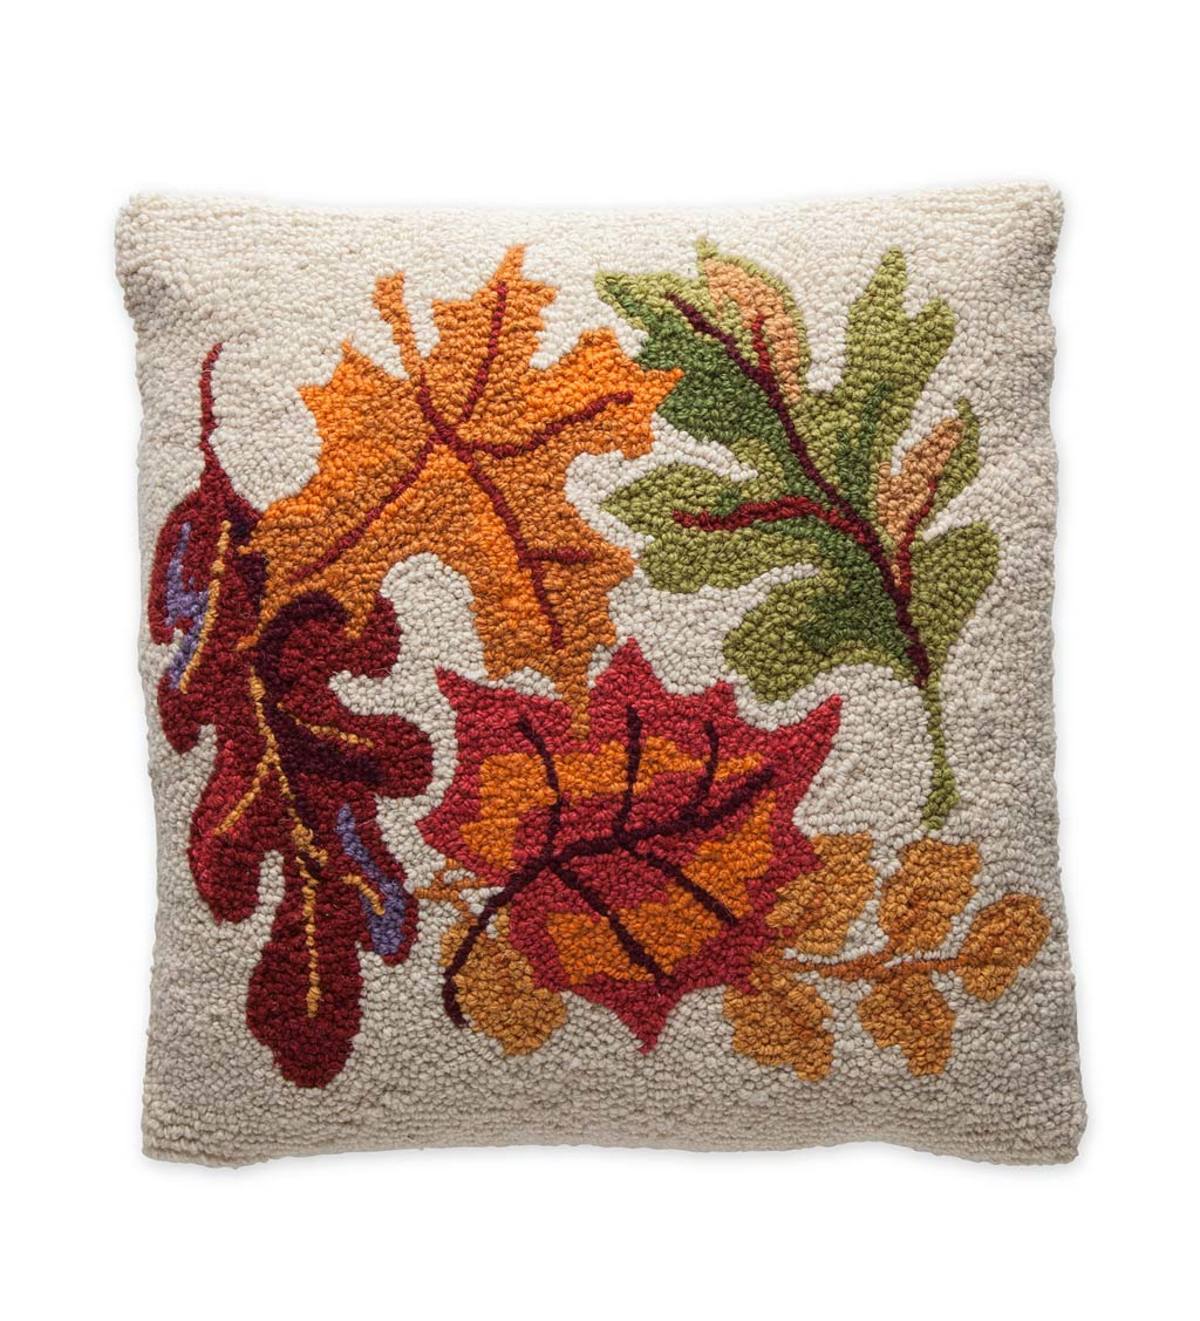 Hand-Hooked Wool Fall Simple Leaves Pillow 16